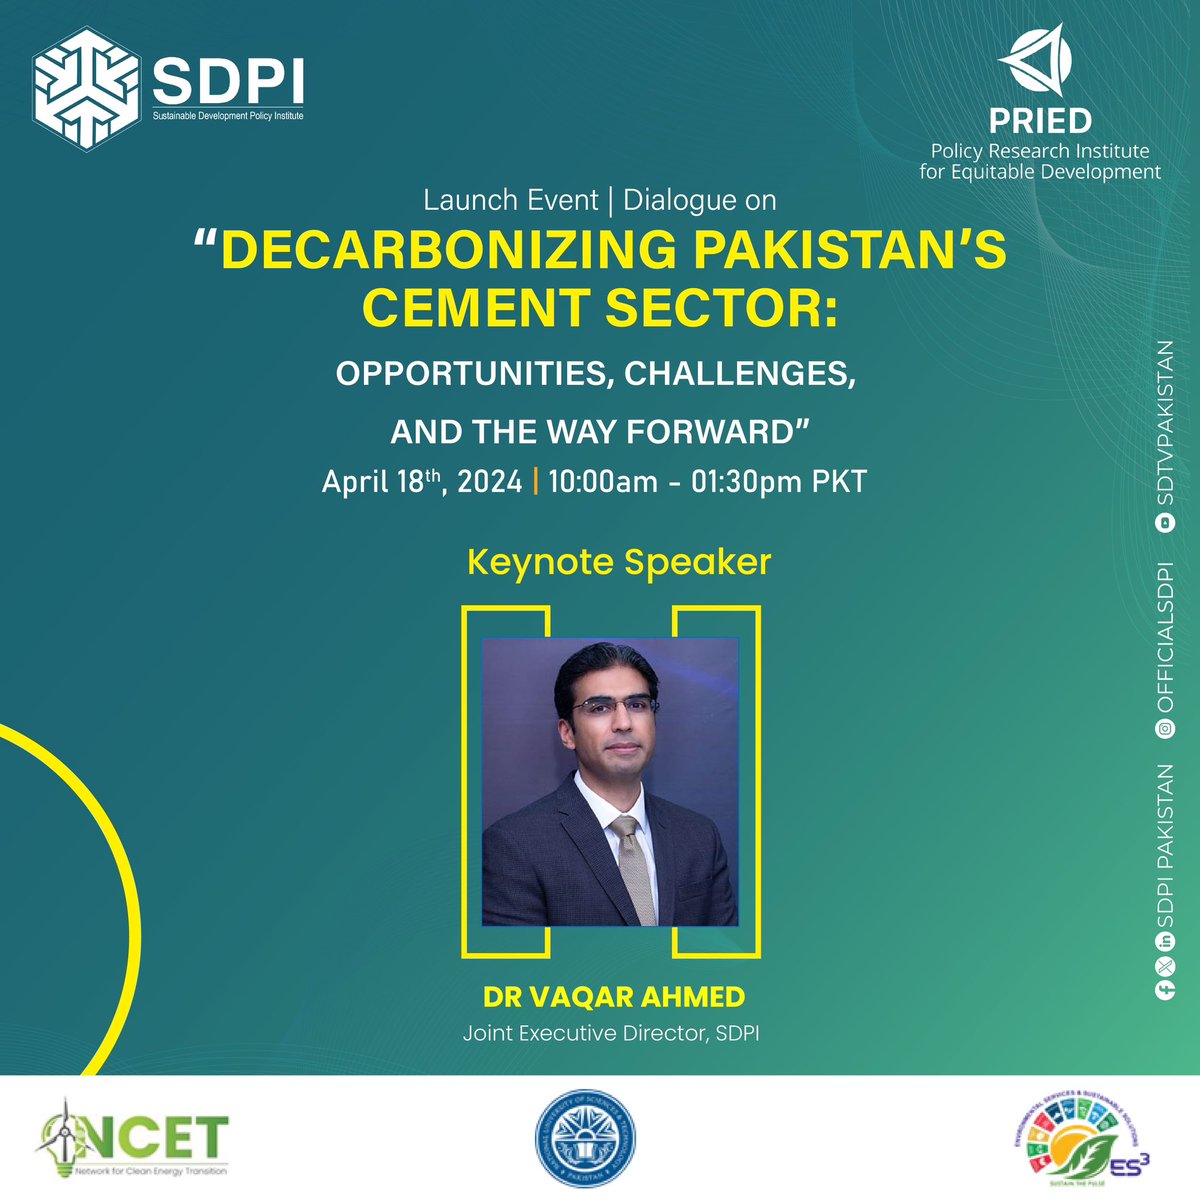 🚀🏭 SDPI under the @NCET_Pak in collaboration with @Pried_org is launching an event and dialogue on Decarbonizing Pakistan's Cement Sector: Opportunities, Challenges & the Way Forward! 🌱 Dr @vaqarahmed (Joint Executive Director, SDPI) will be joining us as a keynote speaker🔽…